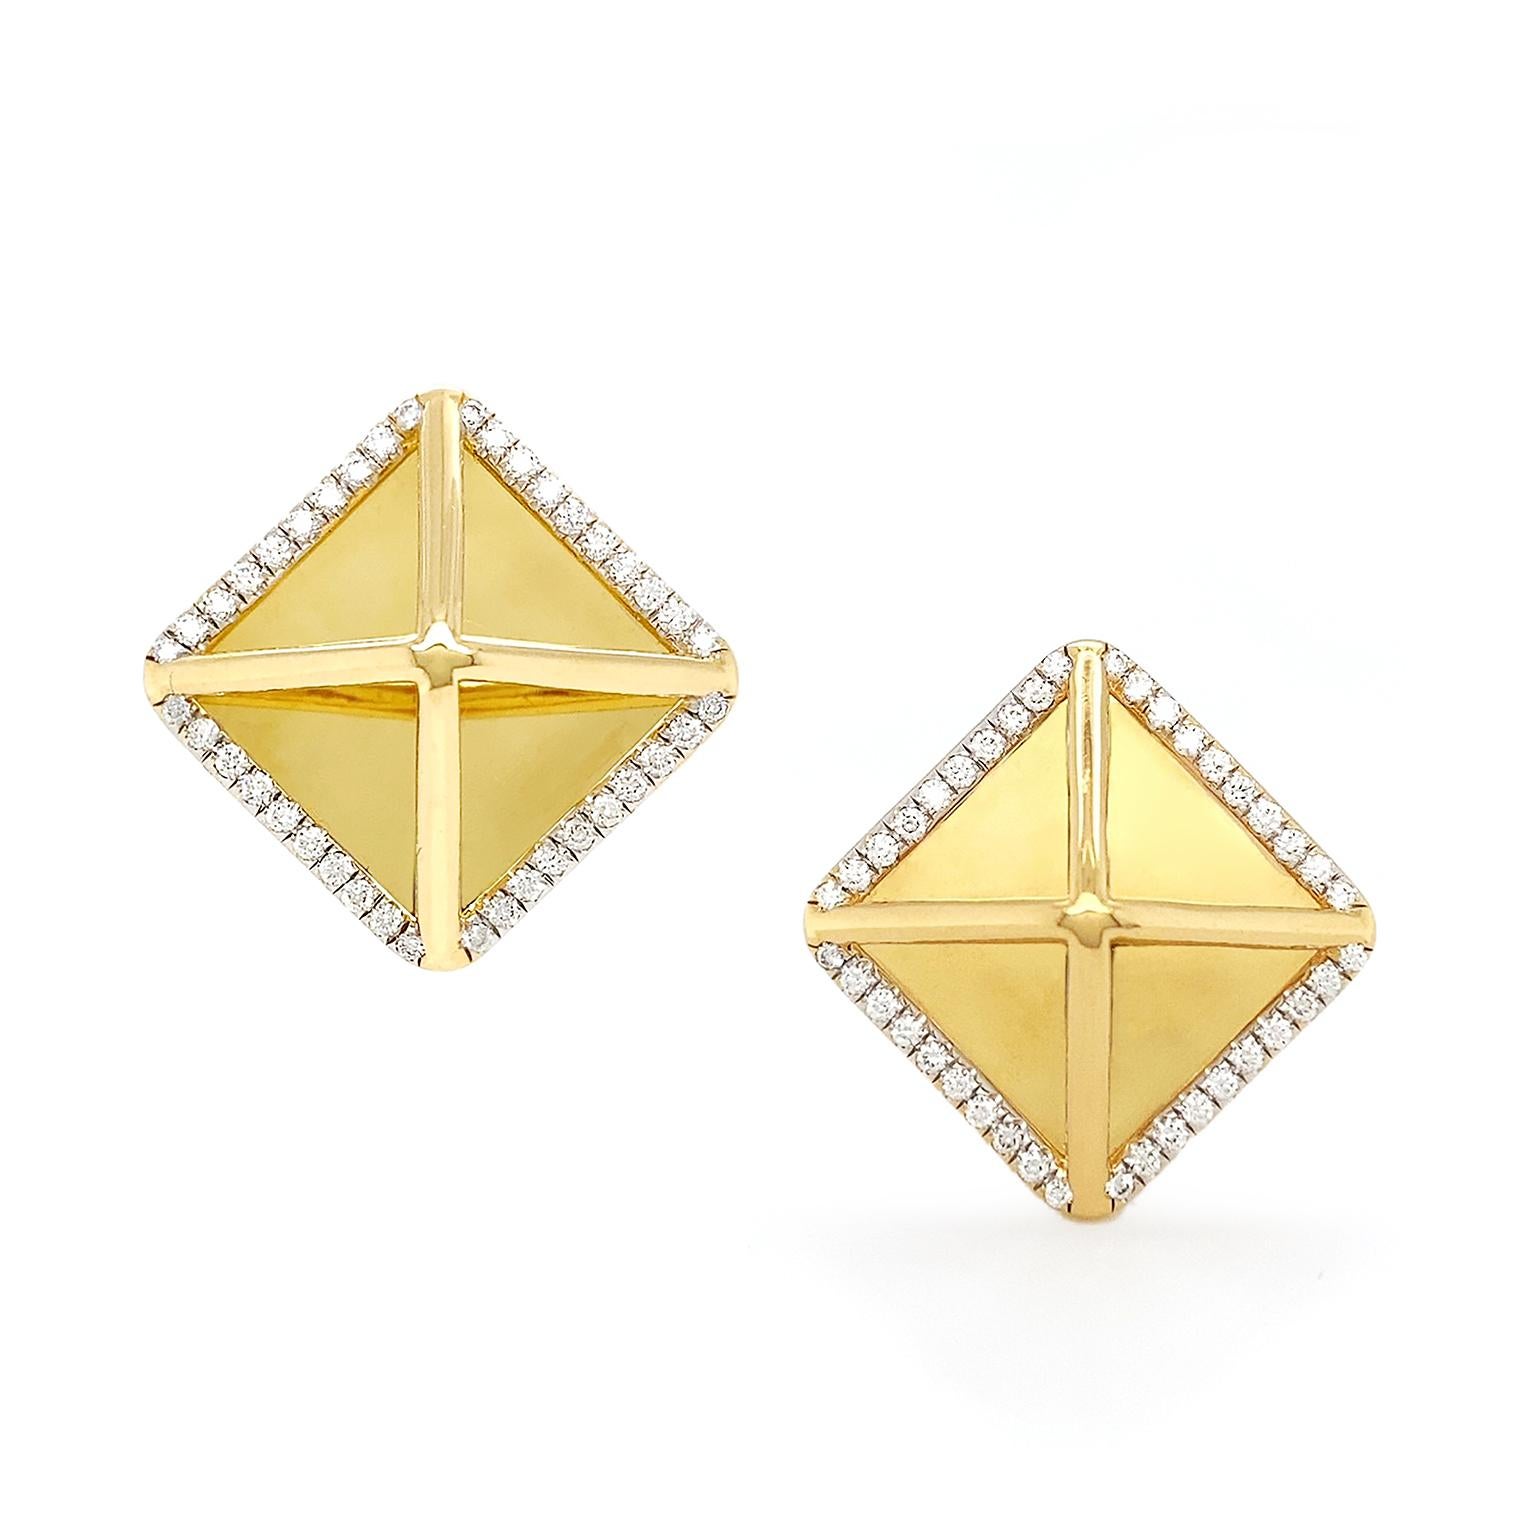 Effulgence in metal and gemstone gives these earrings a memorable touch. A smooth 18k yellow gold square is rotated on its side as a rhombus for the base. Slender arms from each corner rise to form an openwork pyramid. Brilliant cut diamonds grace